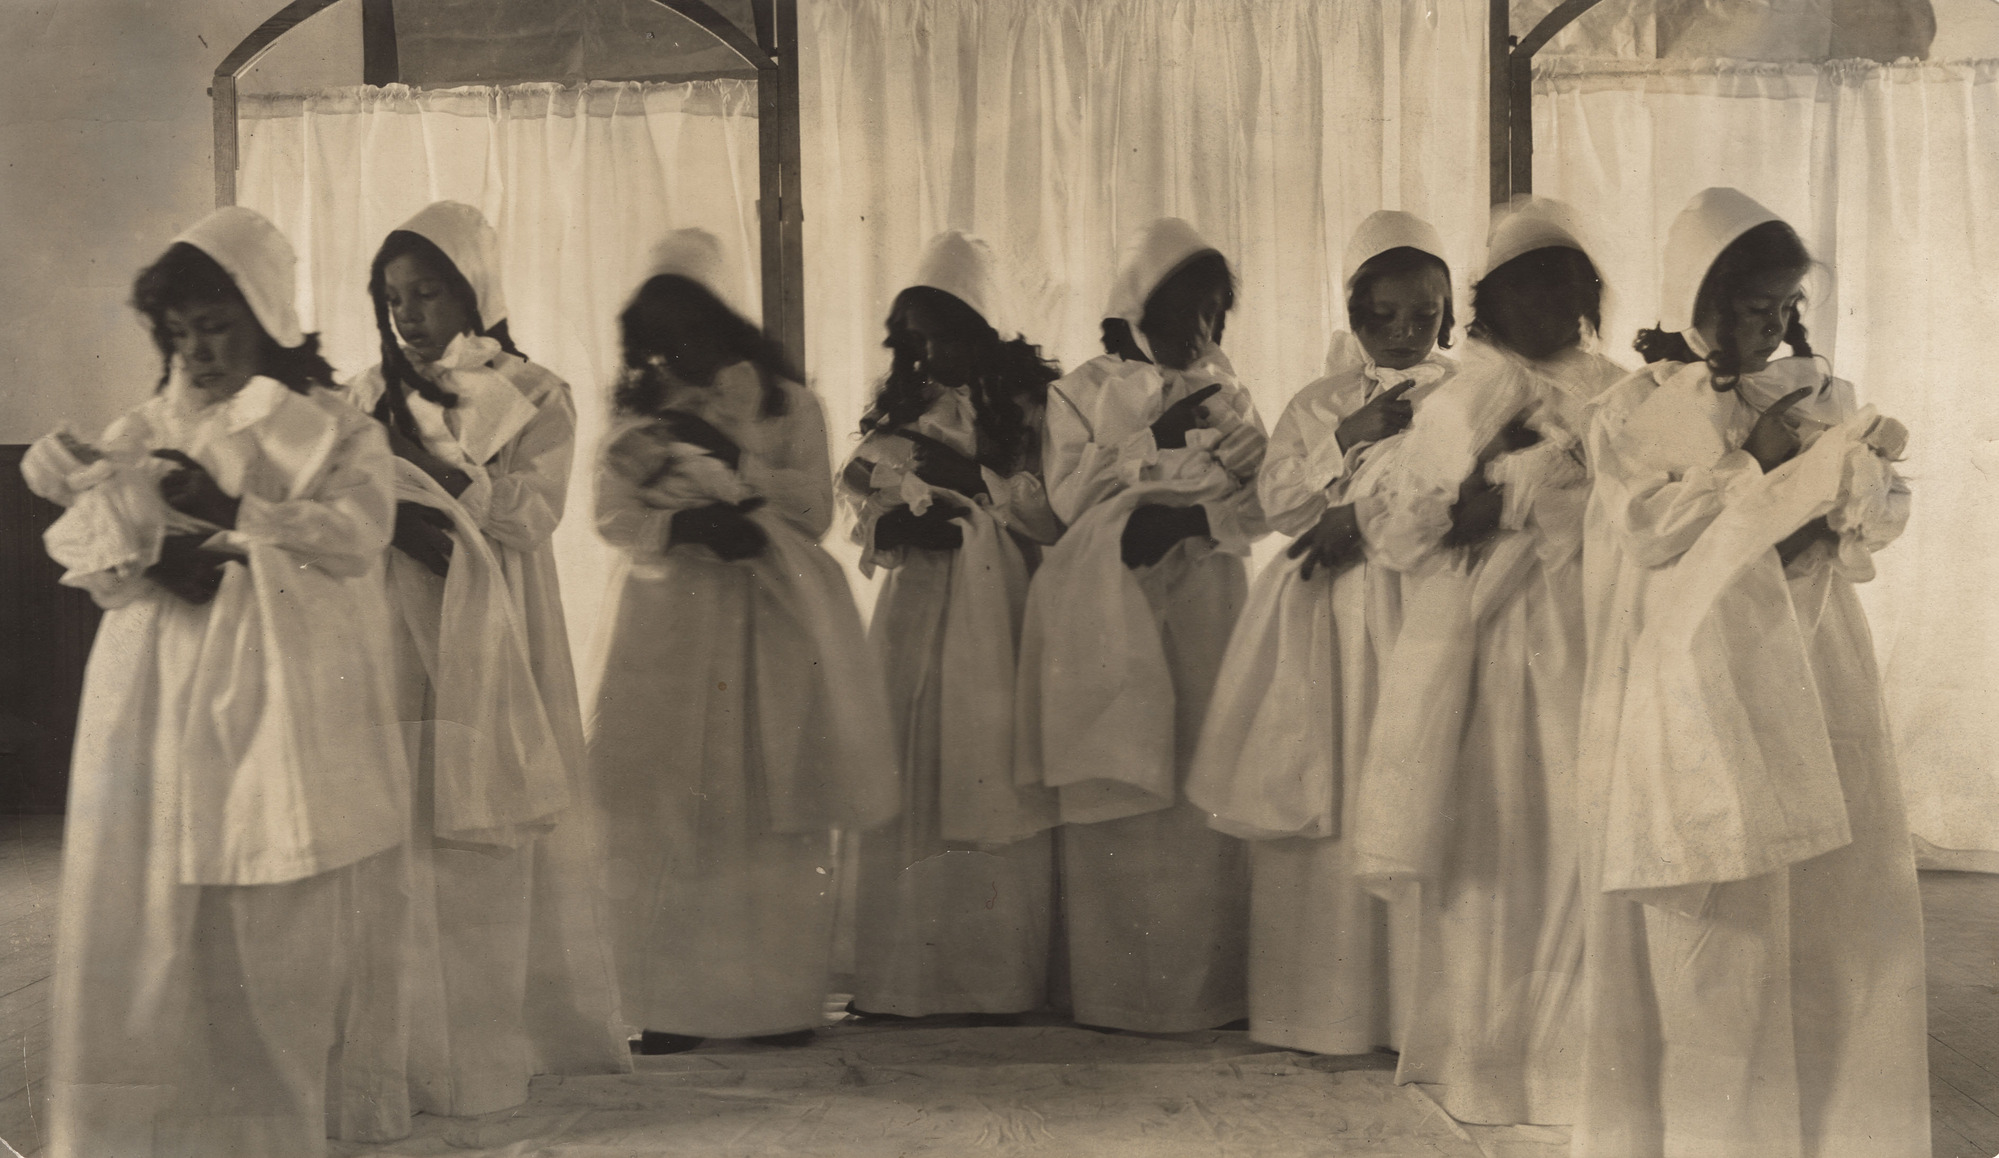 Black and white photograph of line of students dressed in white and holding dolls